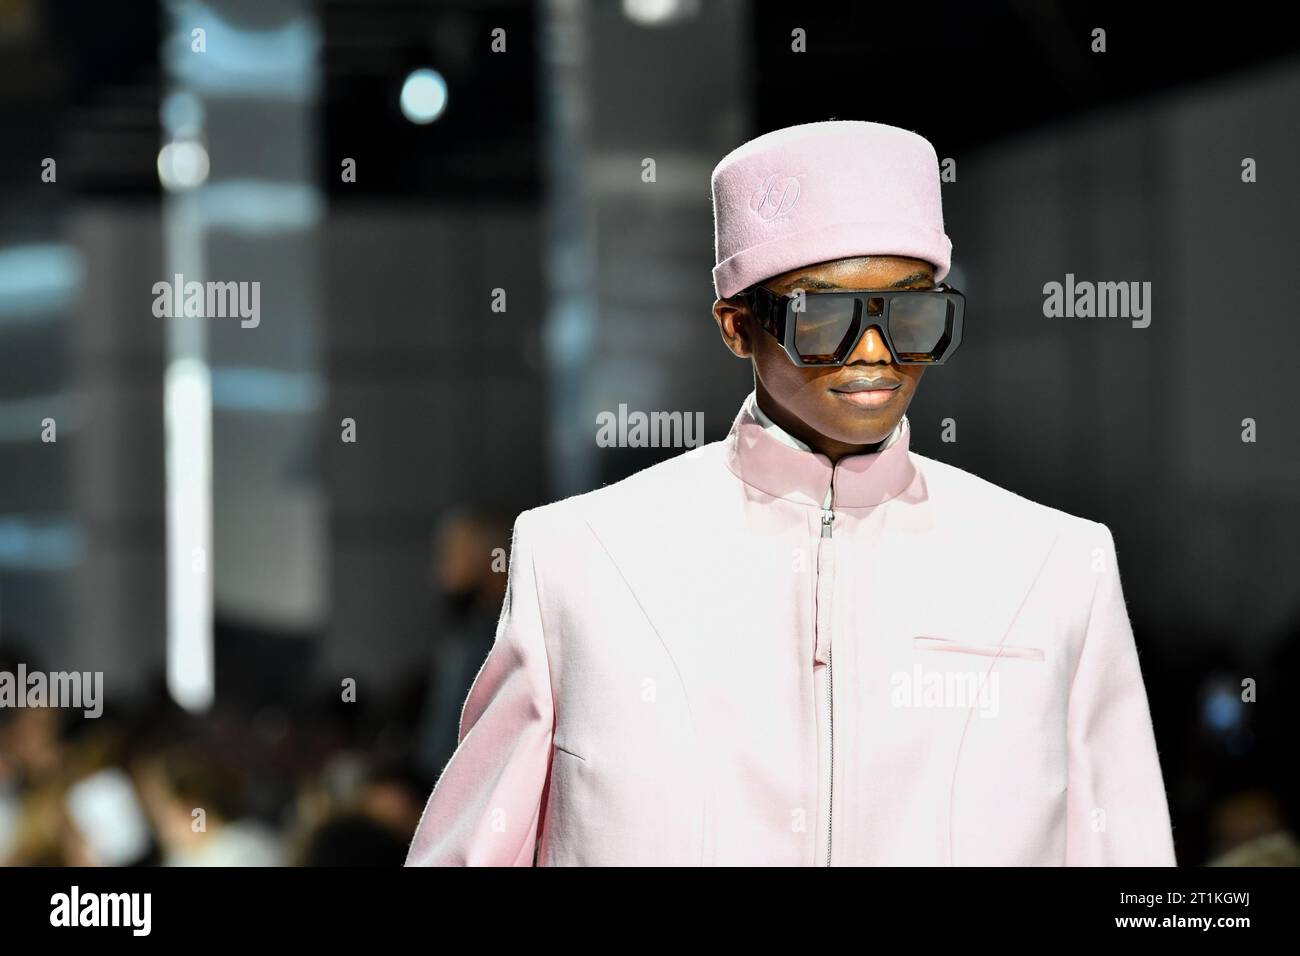 A model walks the runway during the Fashion show by designer Igor Dieryck (Belgium) at the 38th International Festival of Fashion, Photography and Accessories in Hyères. The Première Vision competition is the most important competition for young fashion designers and is held during the Festival of Fashion, Photography and Accessories in Hyeres every year. Stock Photo